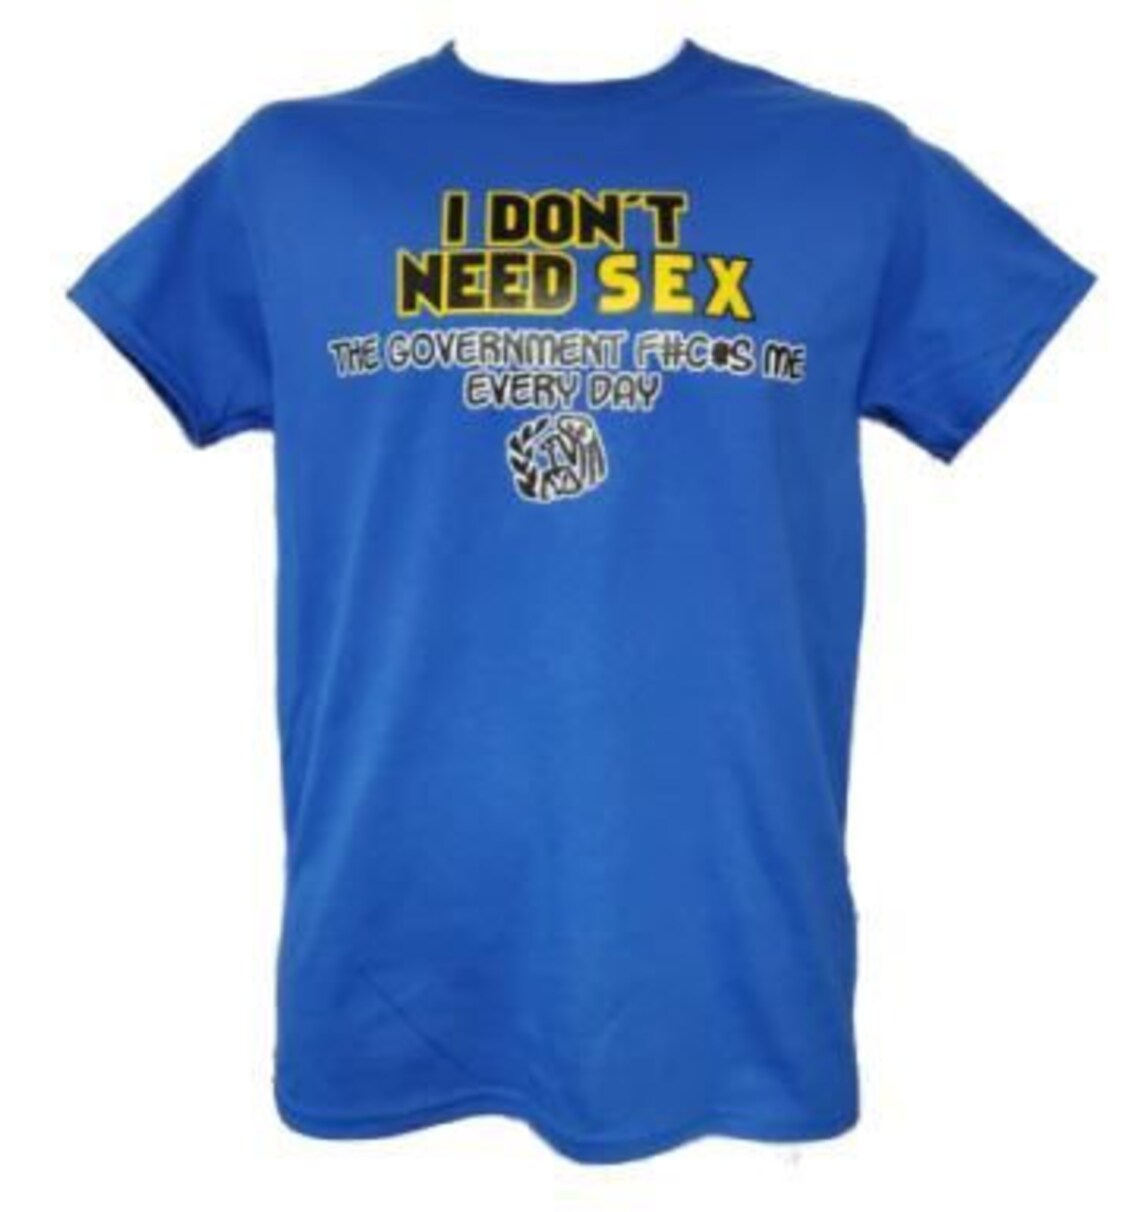 I Dont Need Sex T Shirt Offensive Adult Humor Etsy